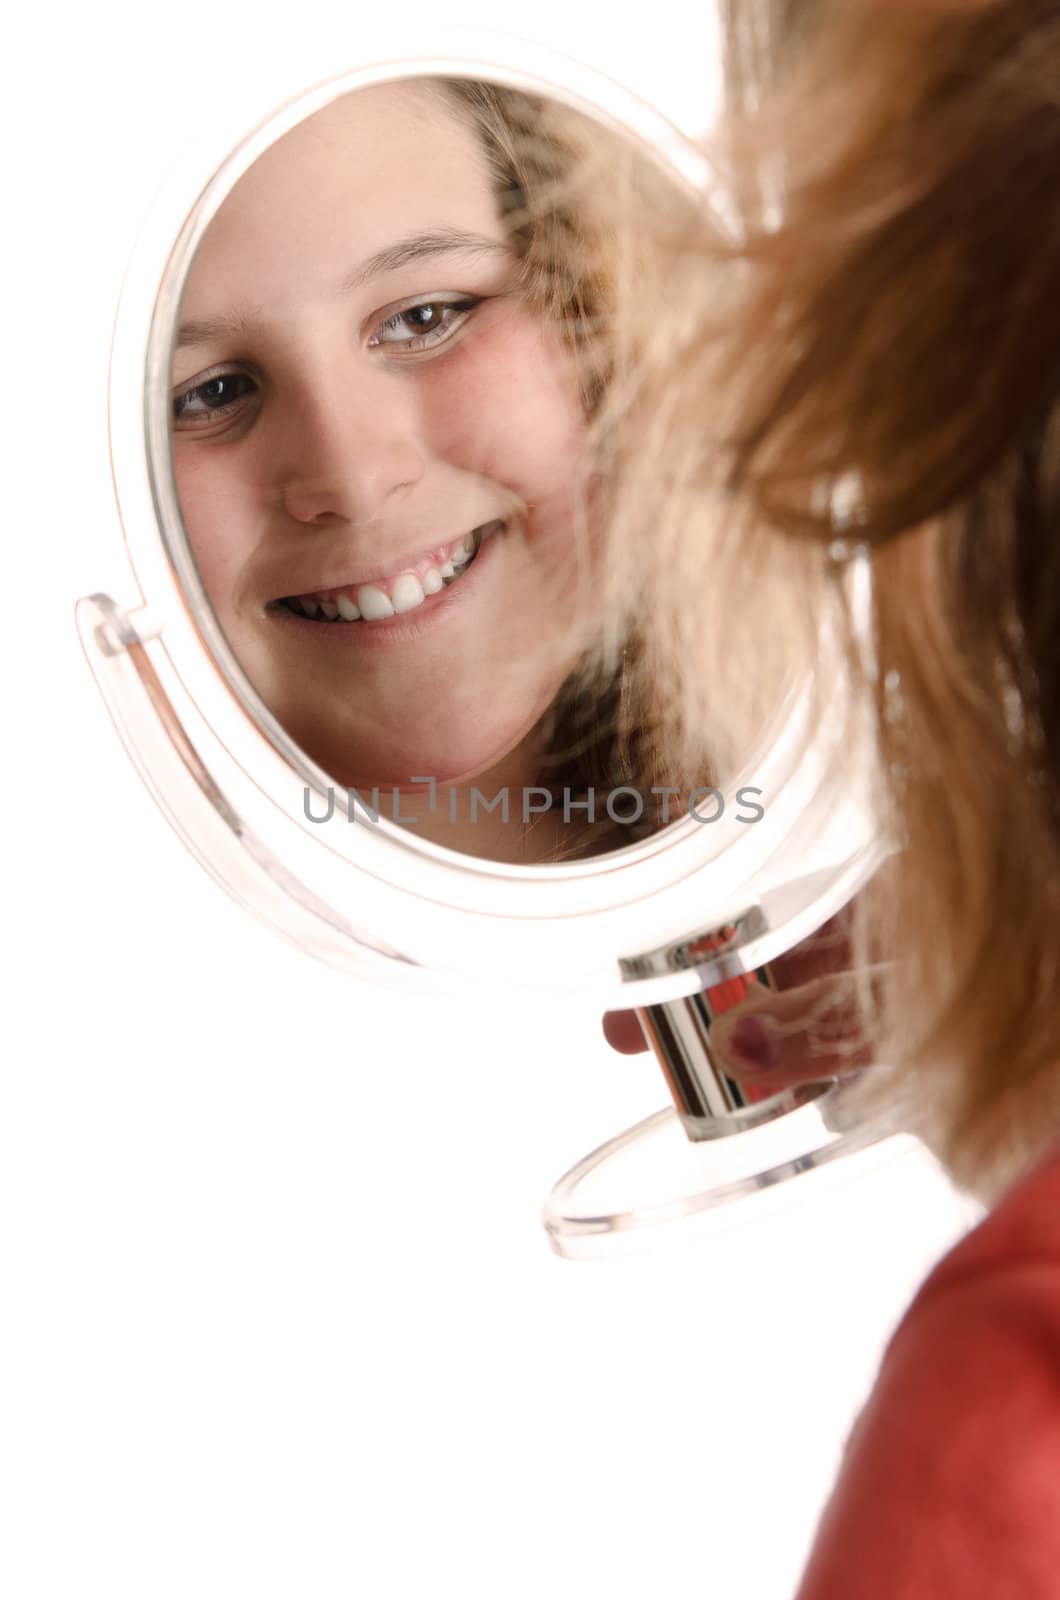 A smiling preteen girl is looking at herself in a small mirror, isolated against a white background.